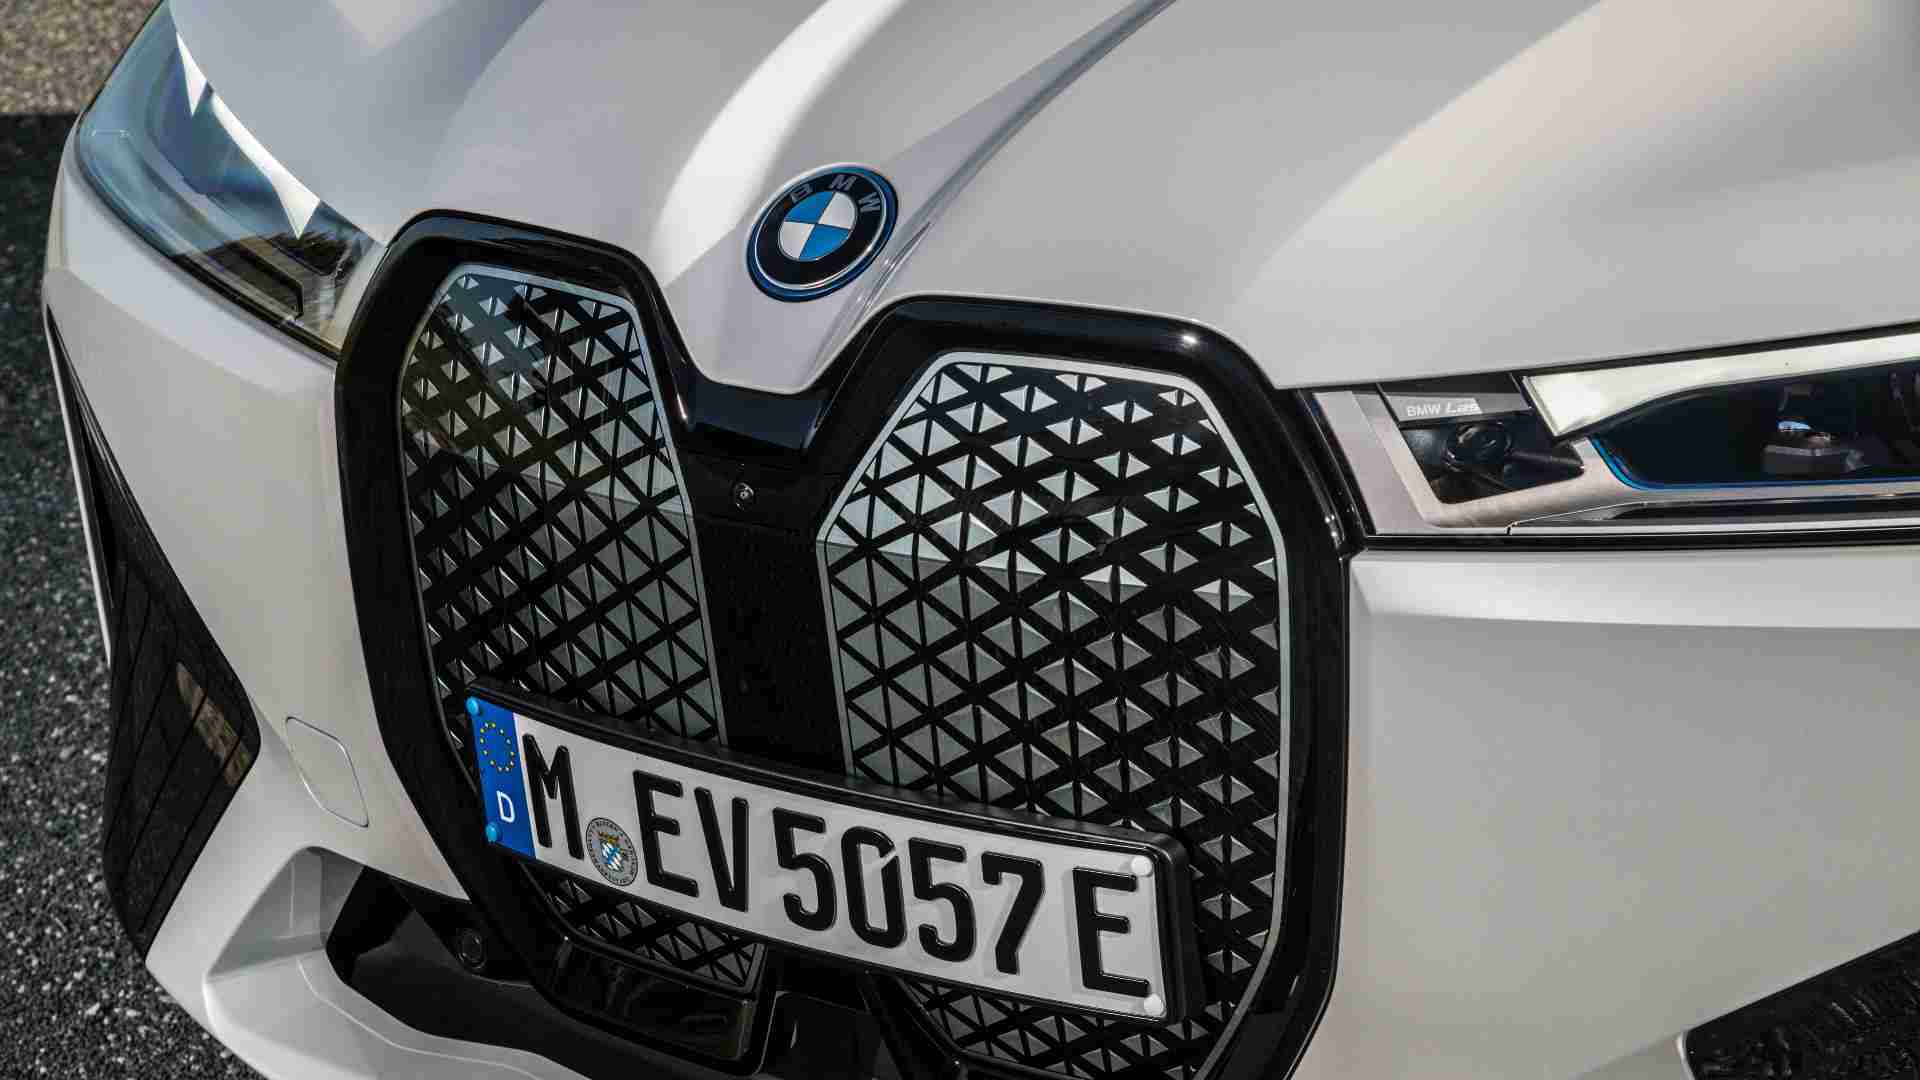 BMW seeks temporary import duty relief on electric vehicles in